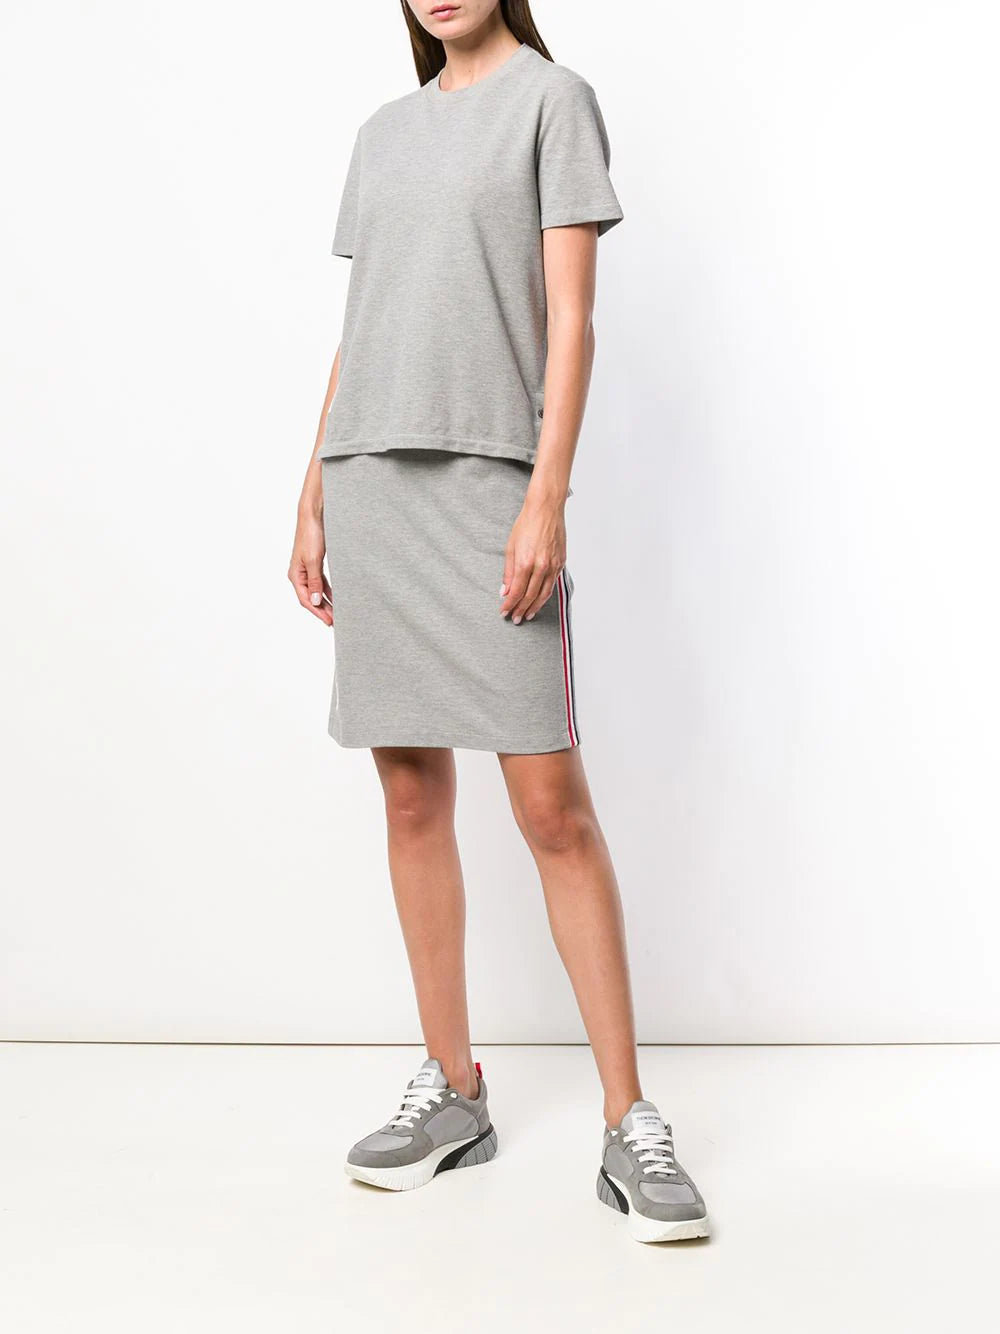 Relaxed Fit Short Sleeve Tee